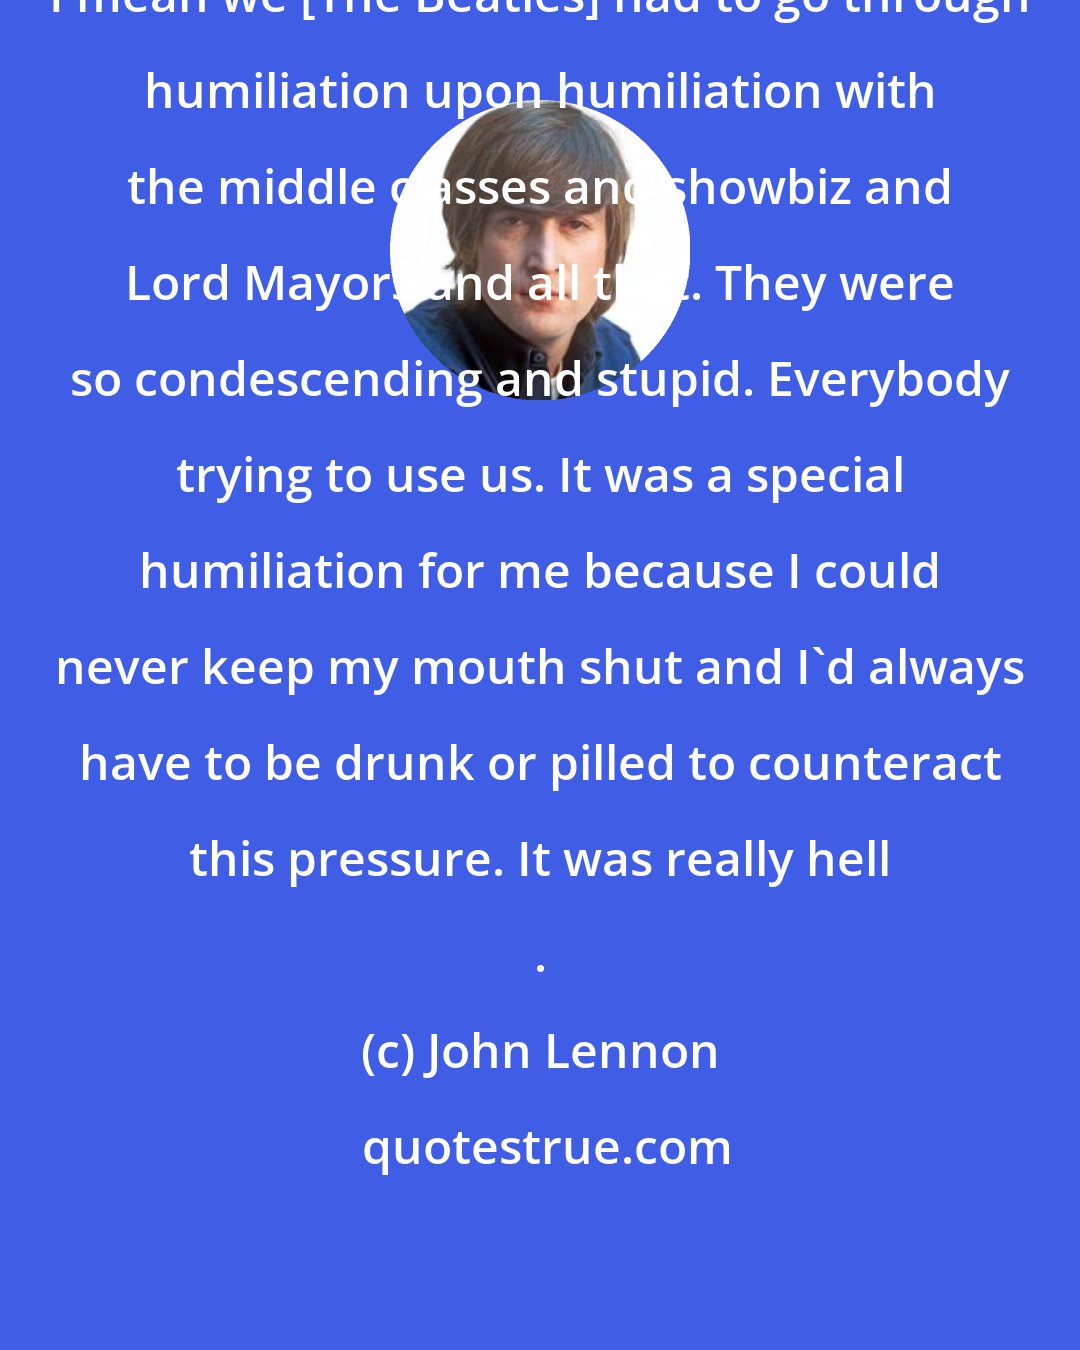 John Lennon: I mean we [The Beatles] had to go through humiliation upon humiliation with the middle classes and showbiz and Lord Mayors and all that. They were so condescending and stupid. Everybody trying to use us. It was a special humiliation for me because I could never keep my mouth shut and I'd always have to be drunk or pilled to counteract this pressure. It was really hell .